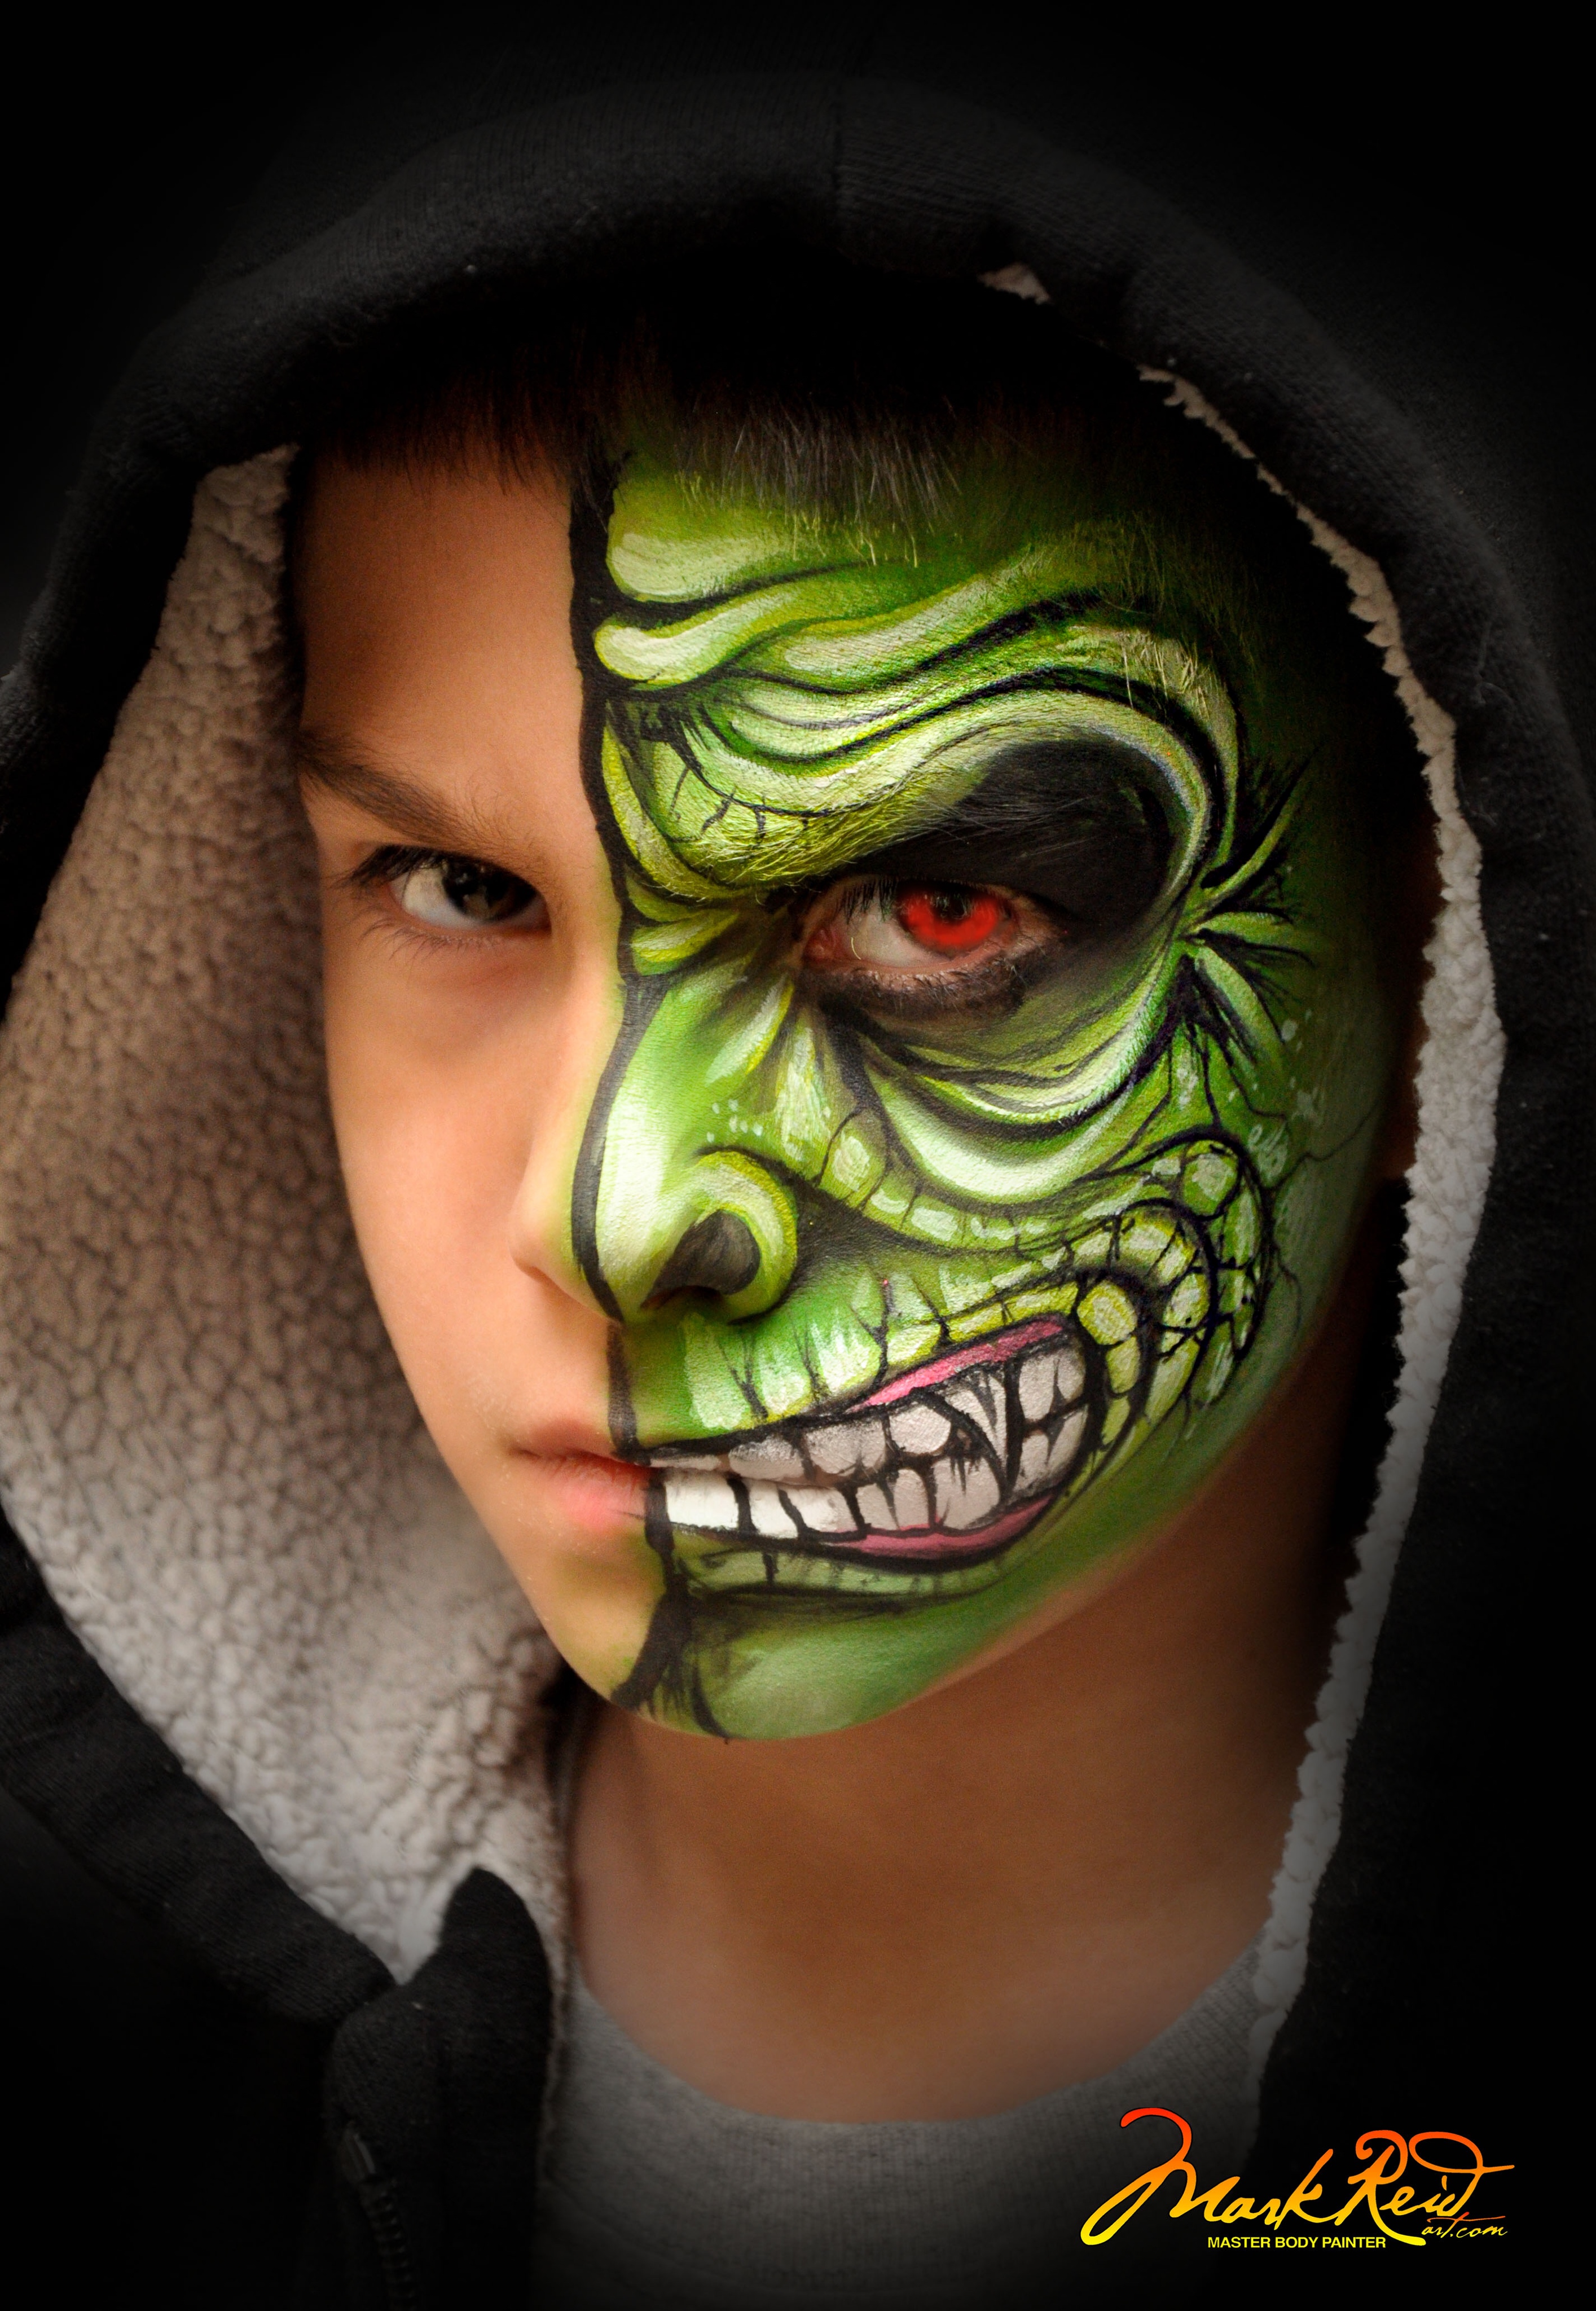 boy face painted with one half of his face not painted and the other half in a green moster with red eye